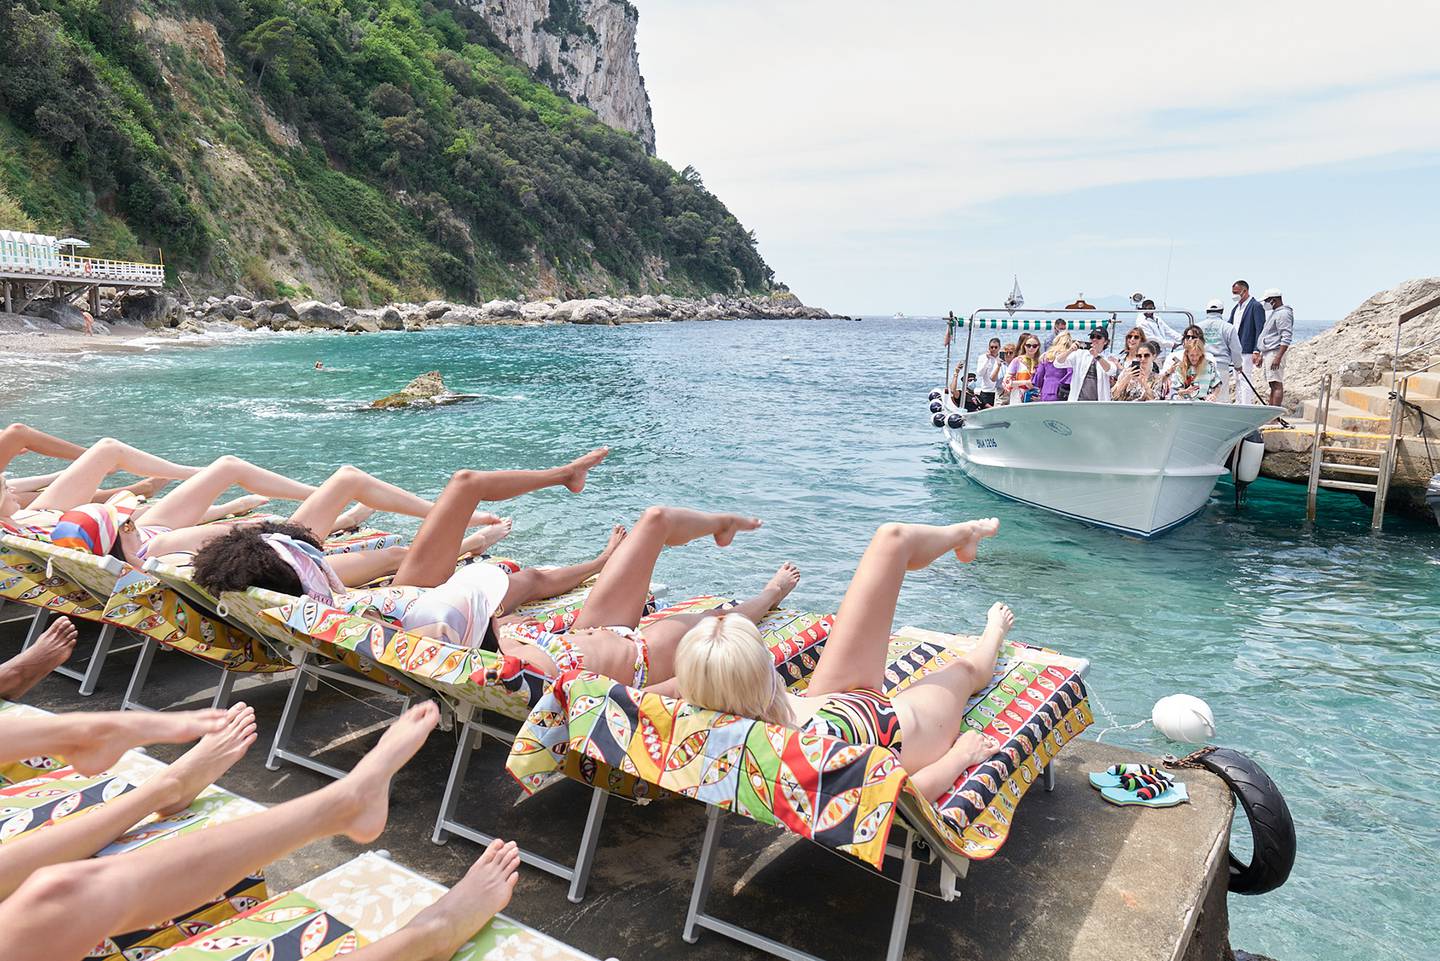 Camille Miceli's Pucci experience on the island of Capri shows how the industry's expansion into resortwear—and resort retail—is accelerating.